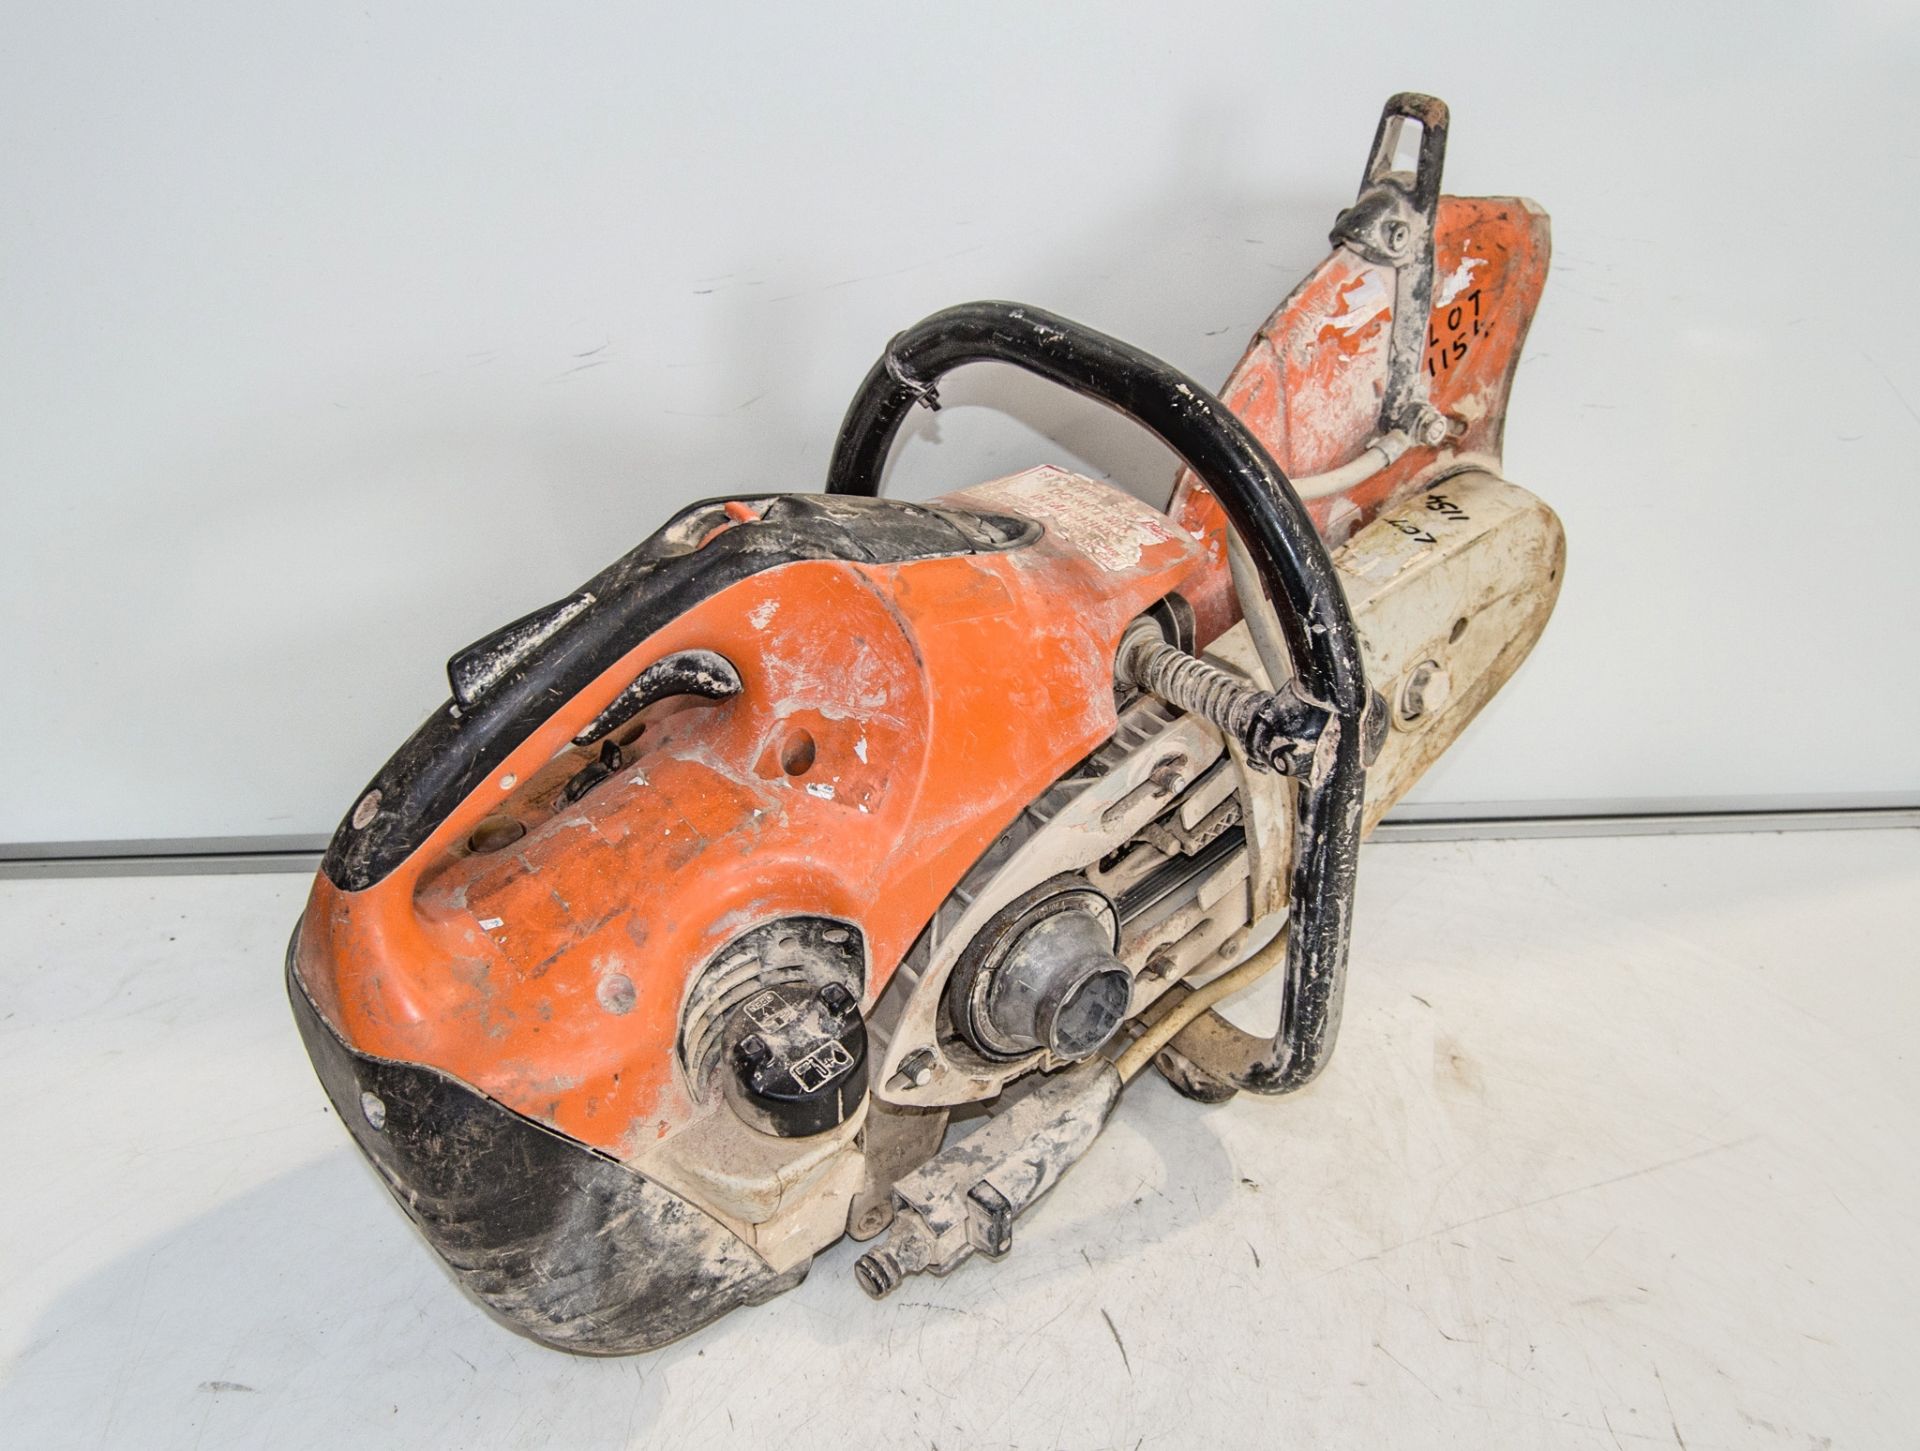 Stihl TS410 petrol driven cut off saw ** Pull cord assembly missing and parts loose ** - Image 2 of 2